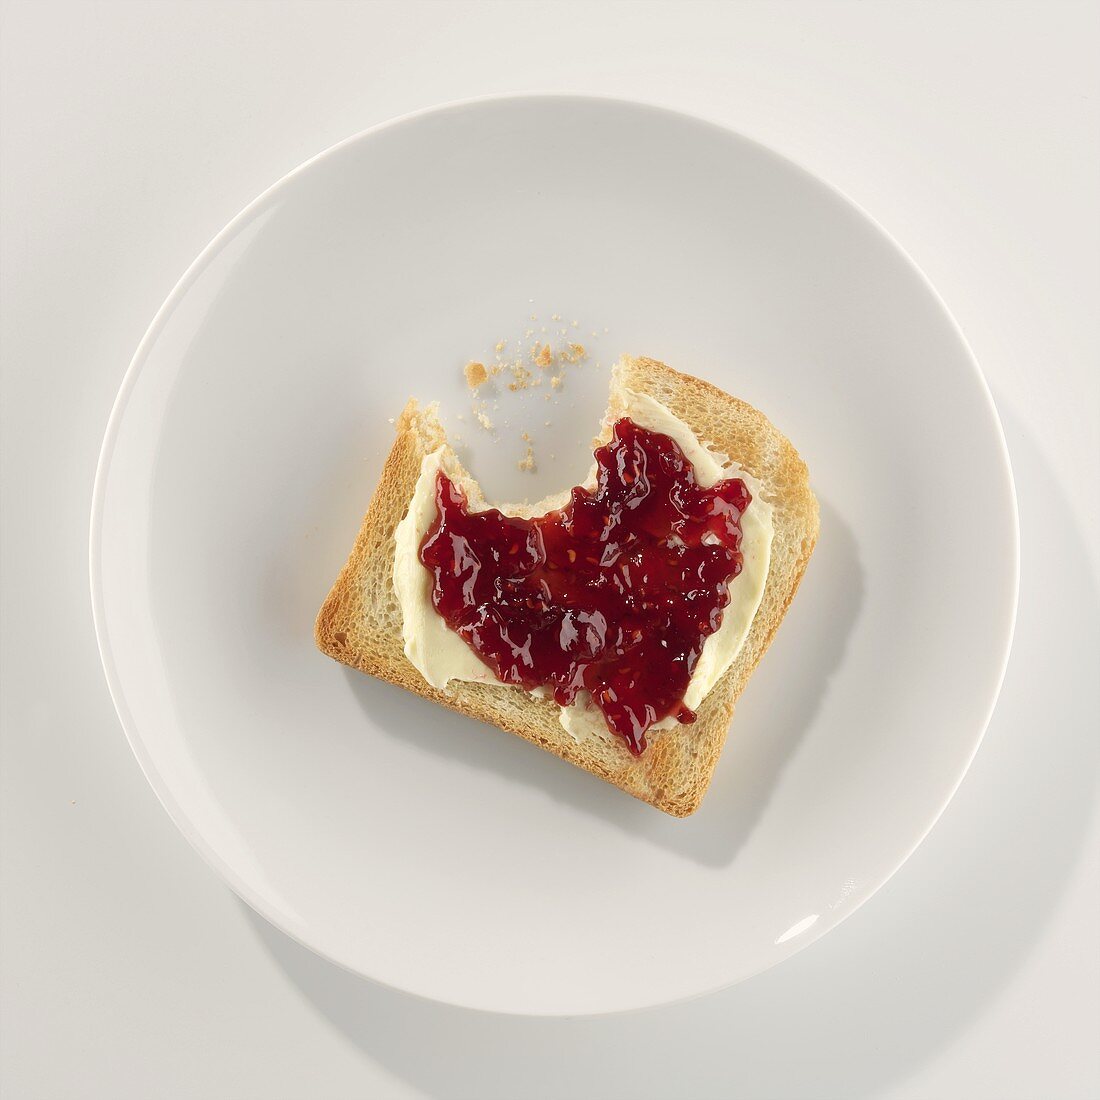 A slice of toast with butter and jam, a bite taken